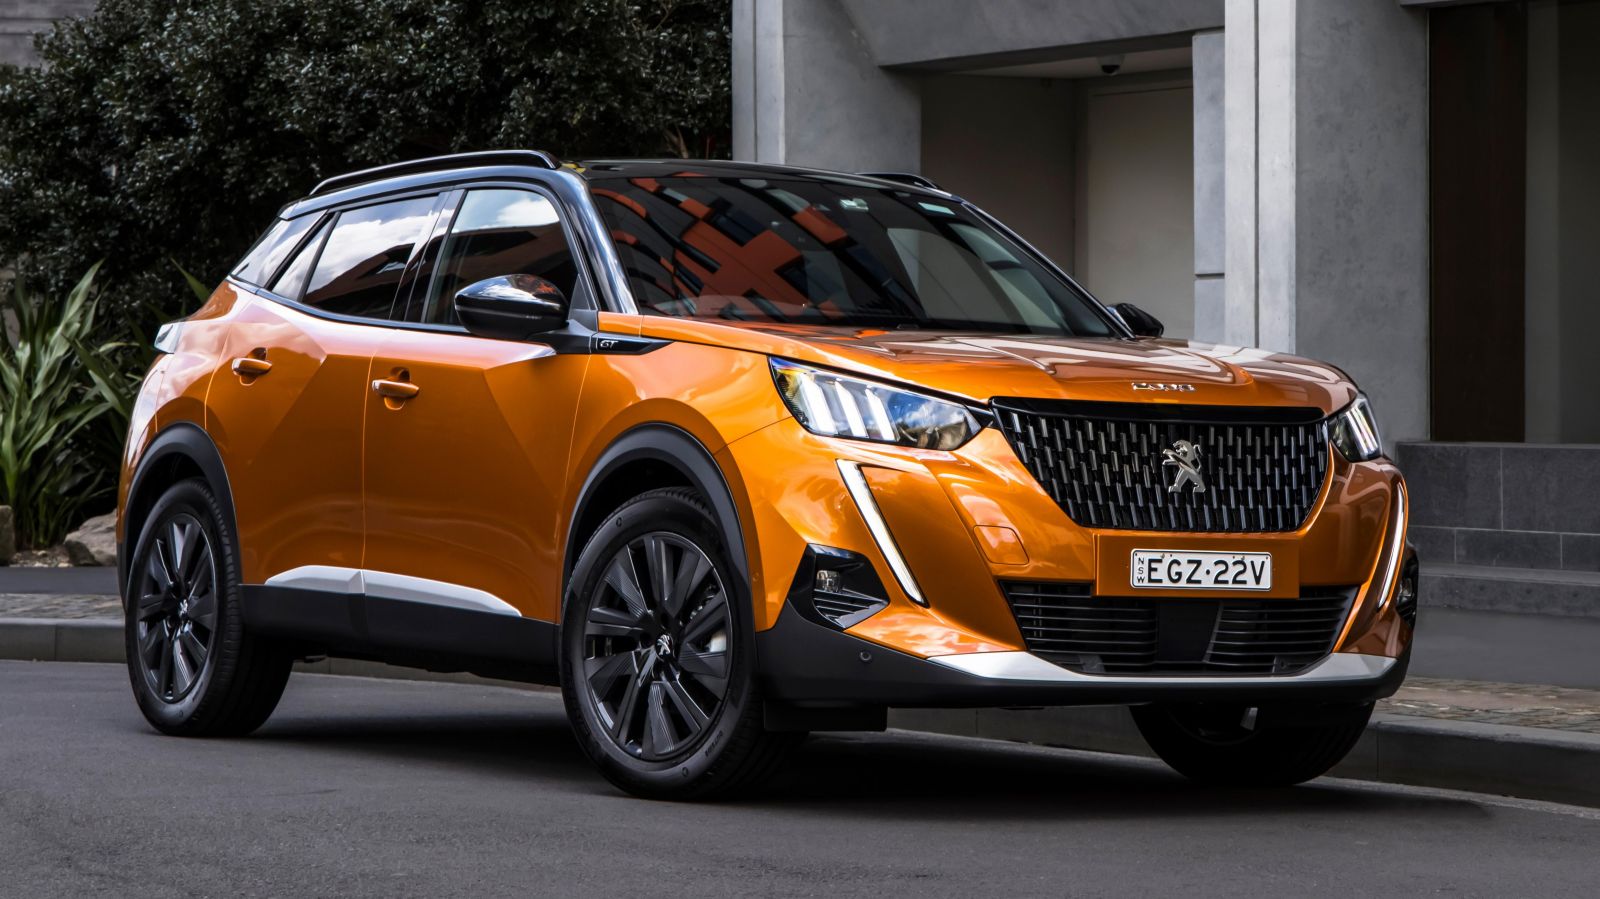 2021 Peugeot 2008 price and specs CarExpert